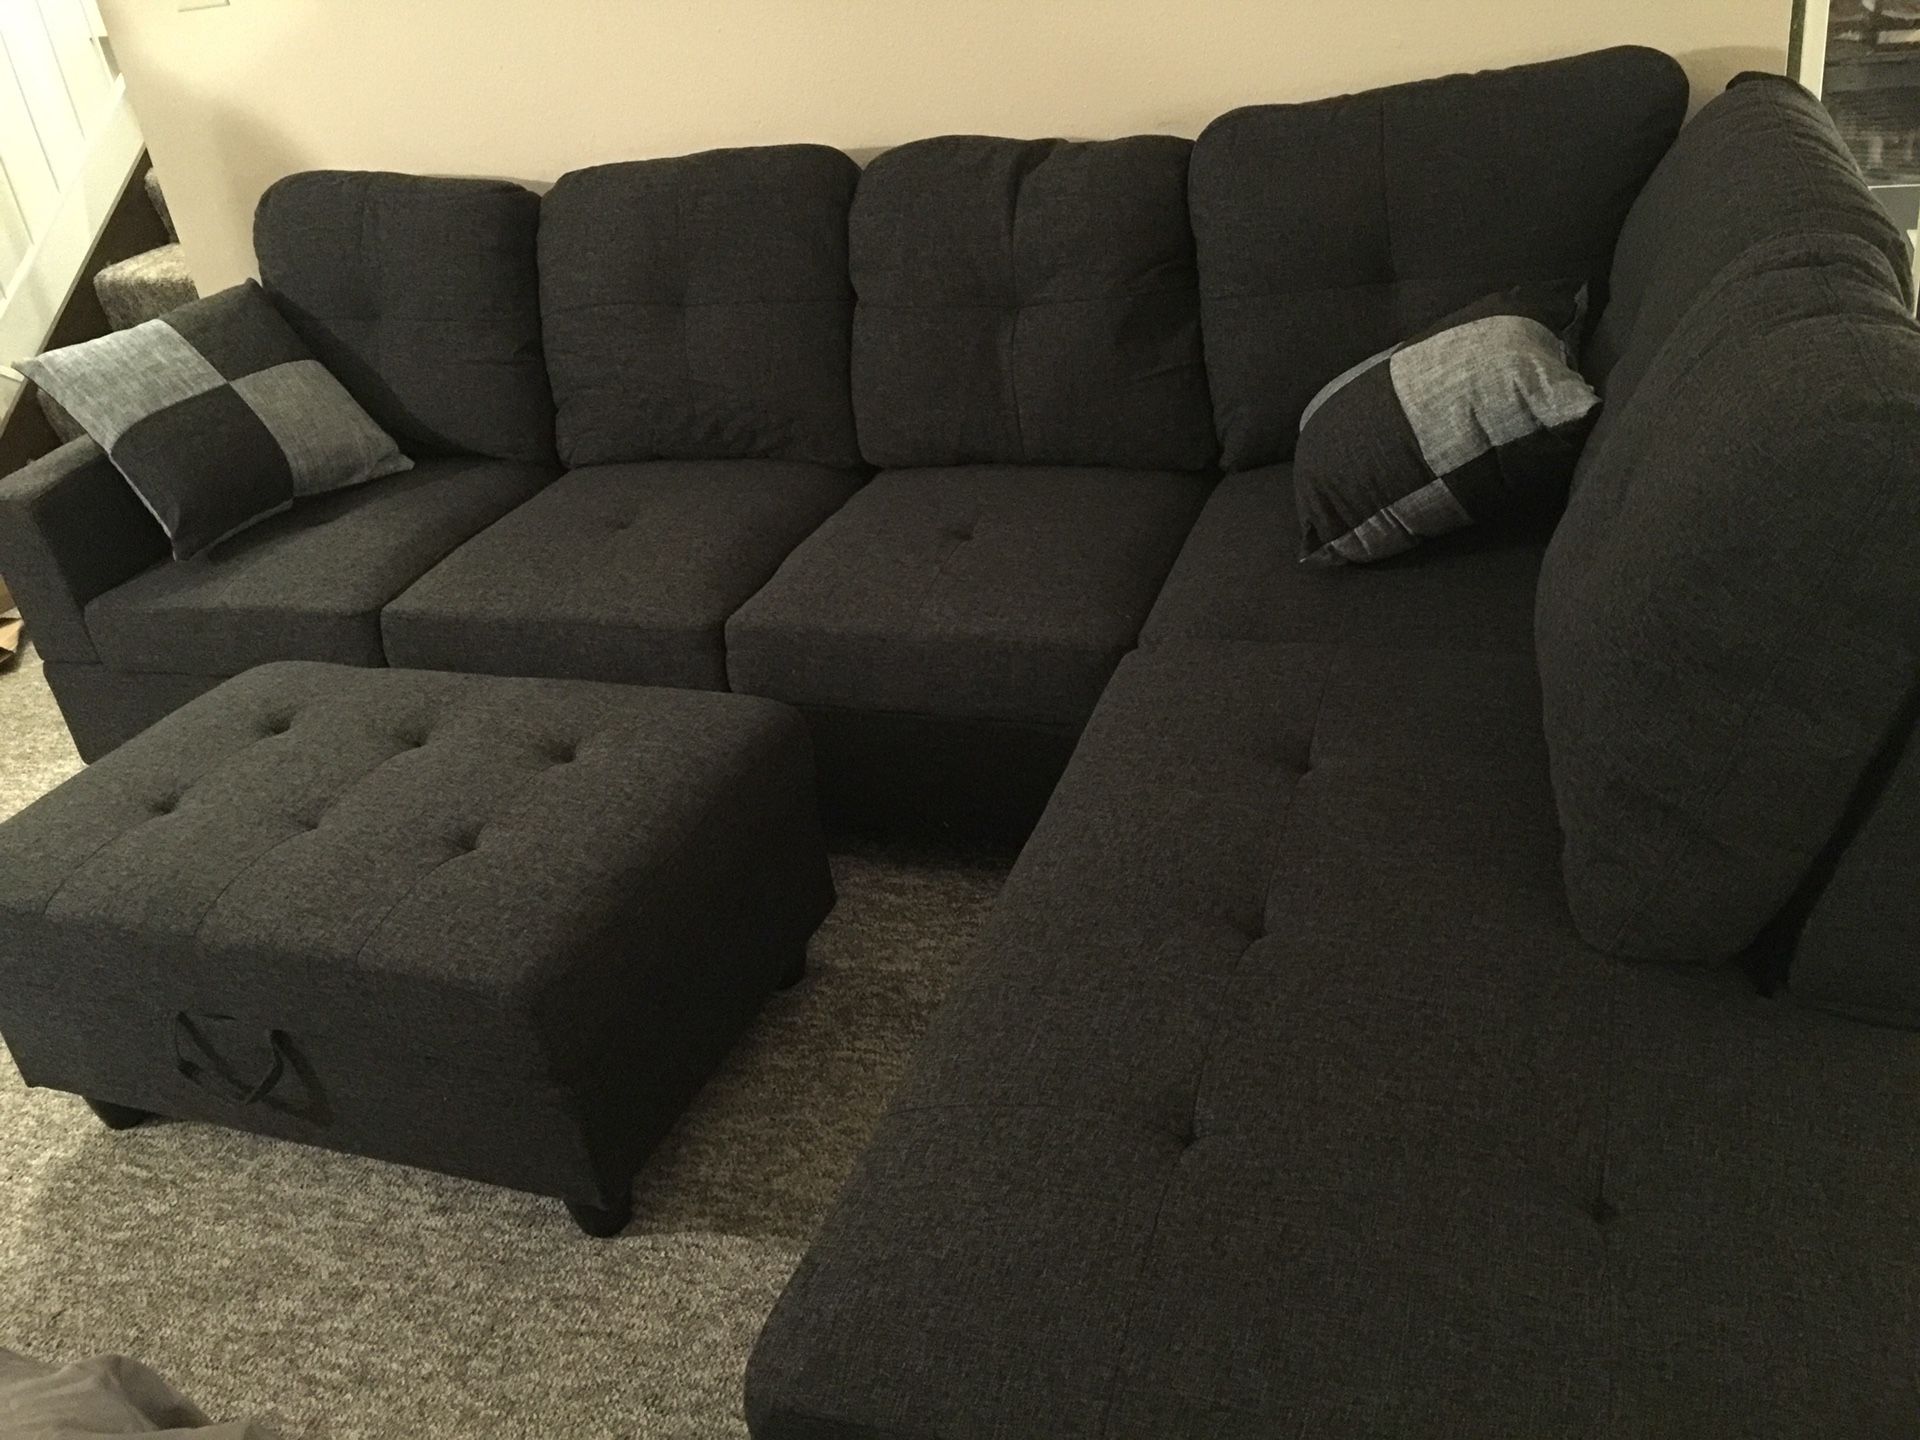 New dark gray linen fabric sectional couch with storage ottoman